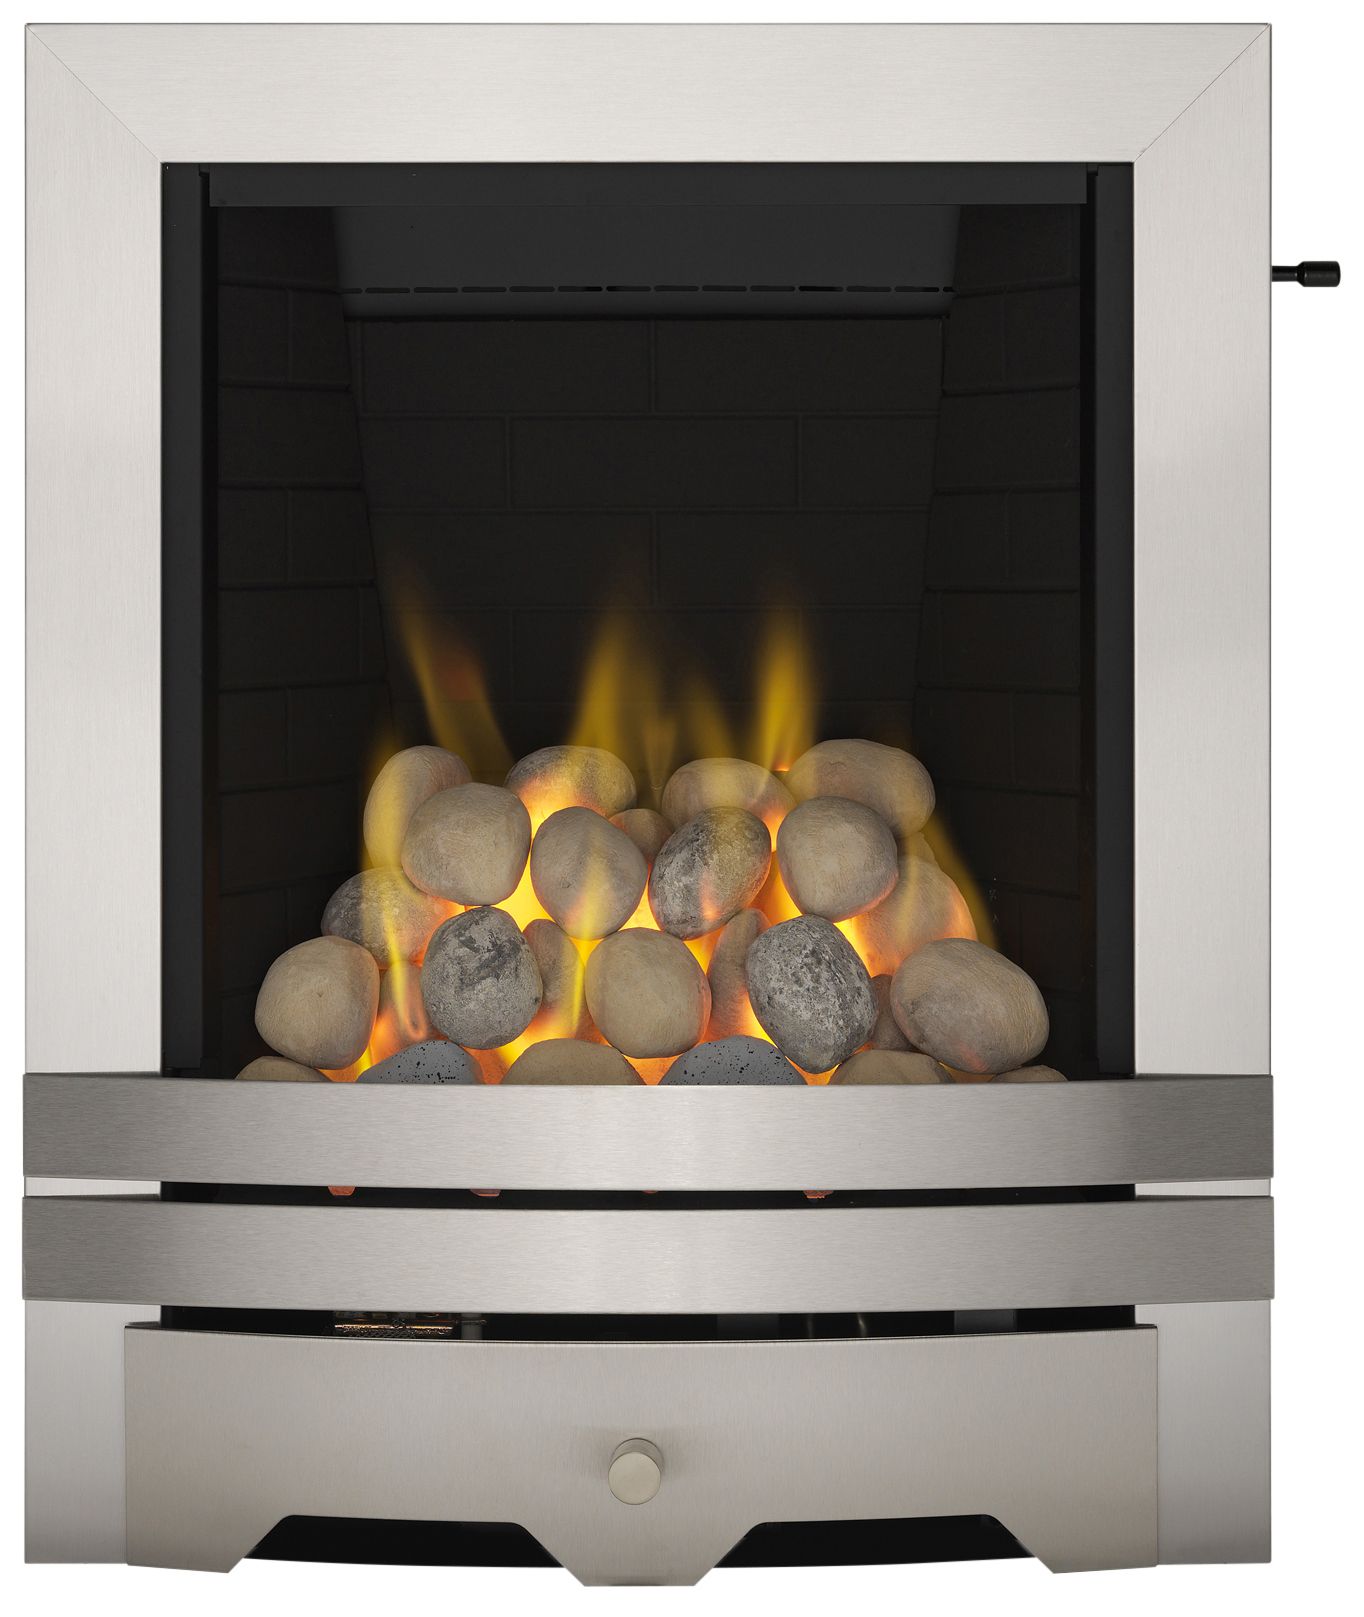 Focal Point Lulworth Brushed stainless steel effect Slide control 3.75kW Gas Fire